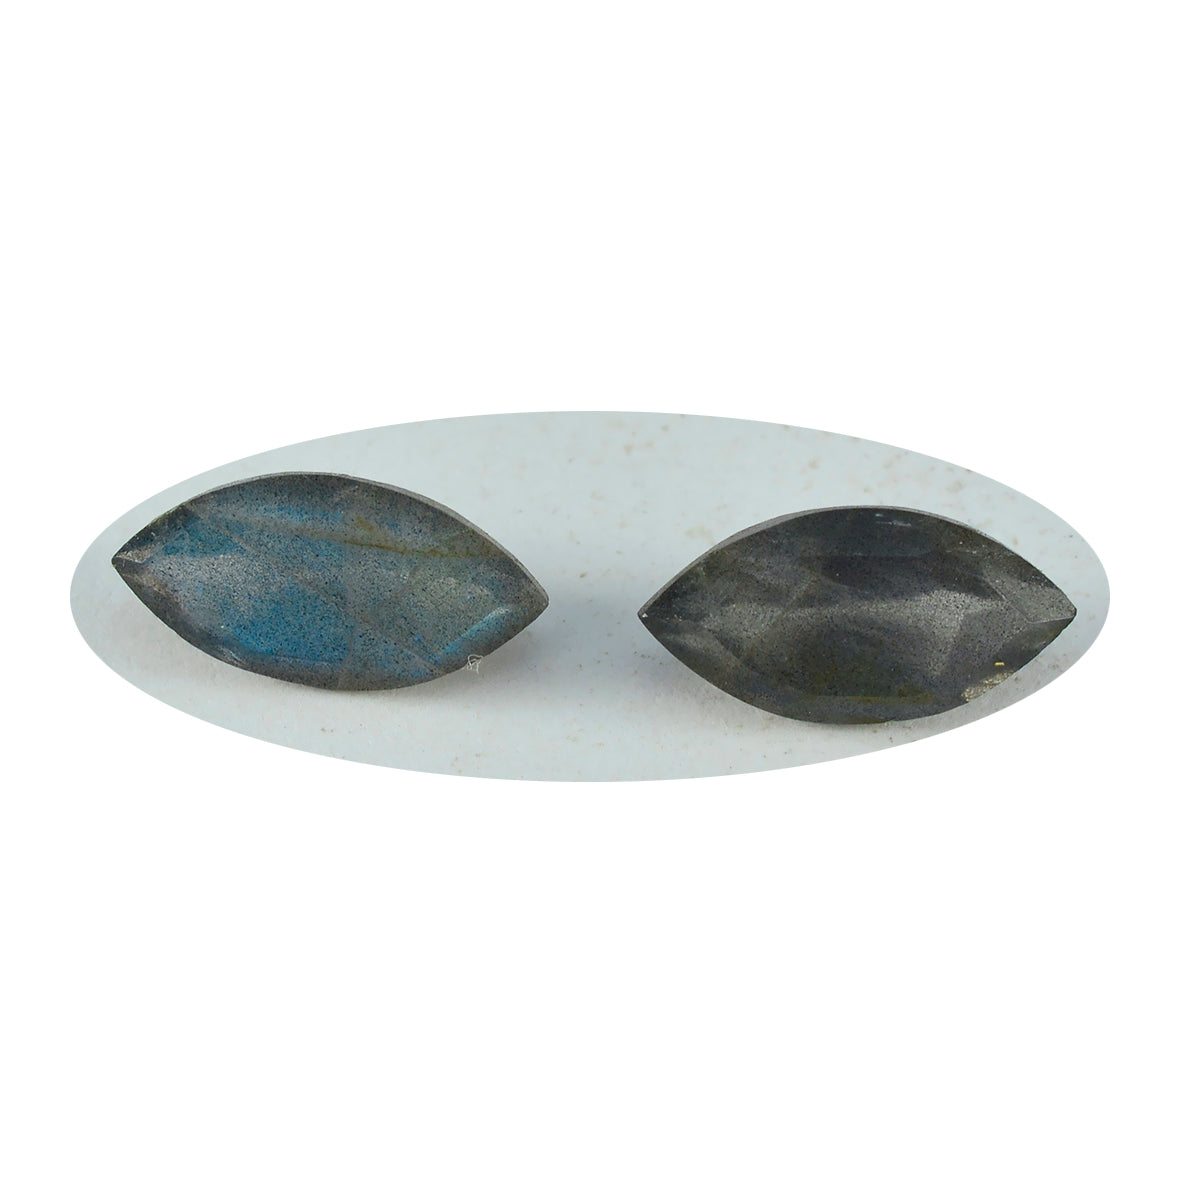 Riyogems 1PC Natural Grey Labradorite Faceted 8x16 mm Marquise Shape cute Quality Loose Stone